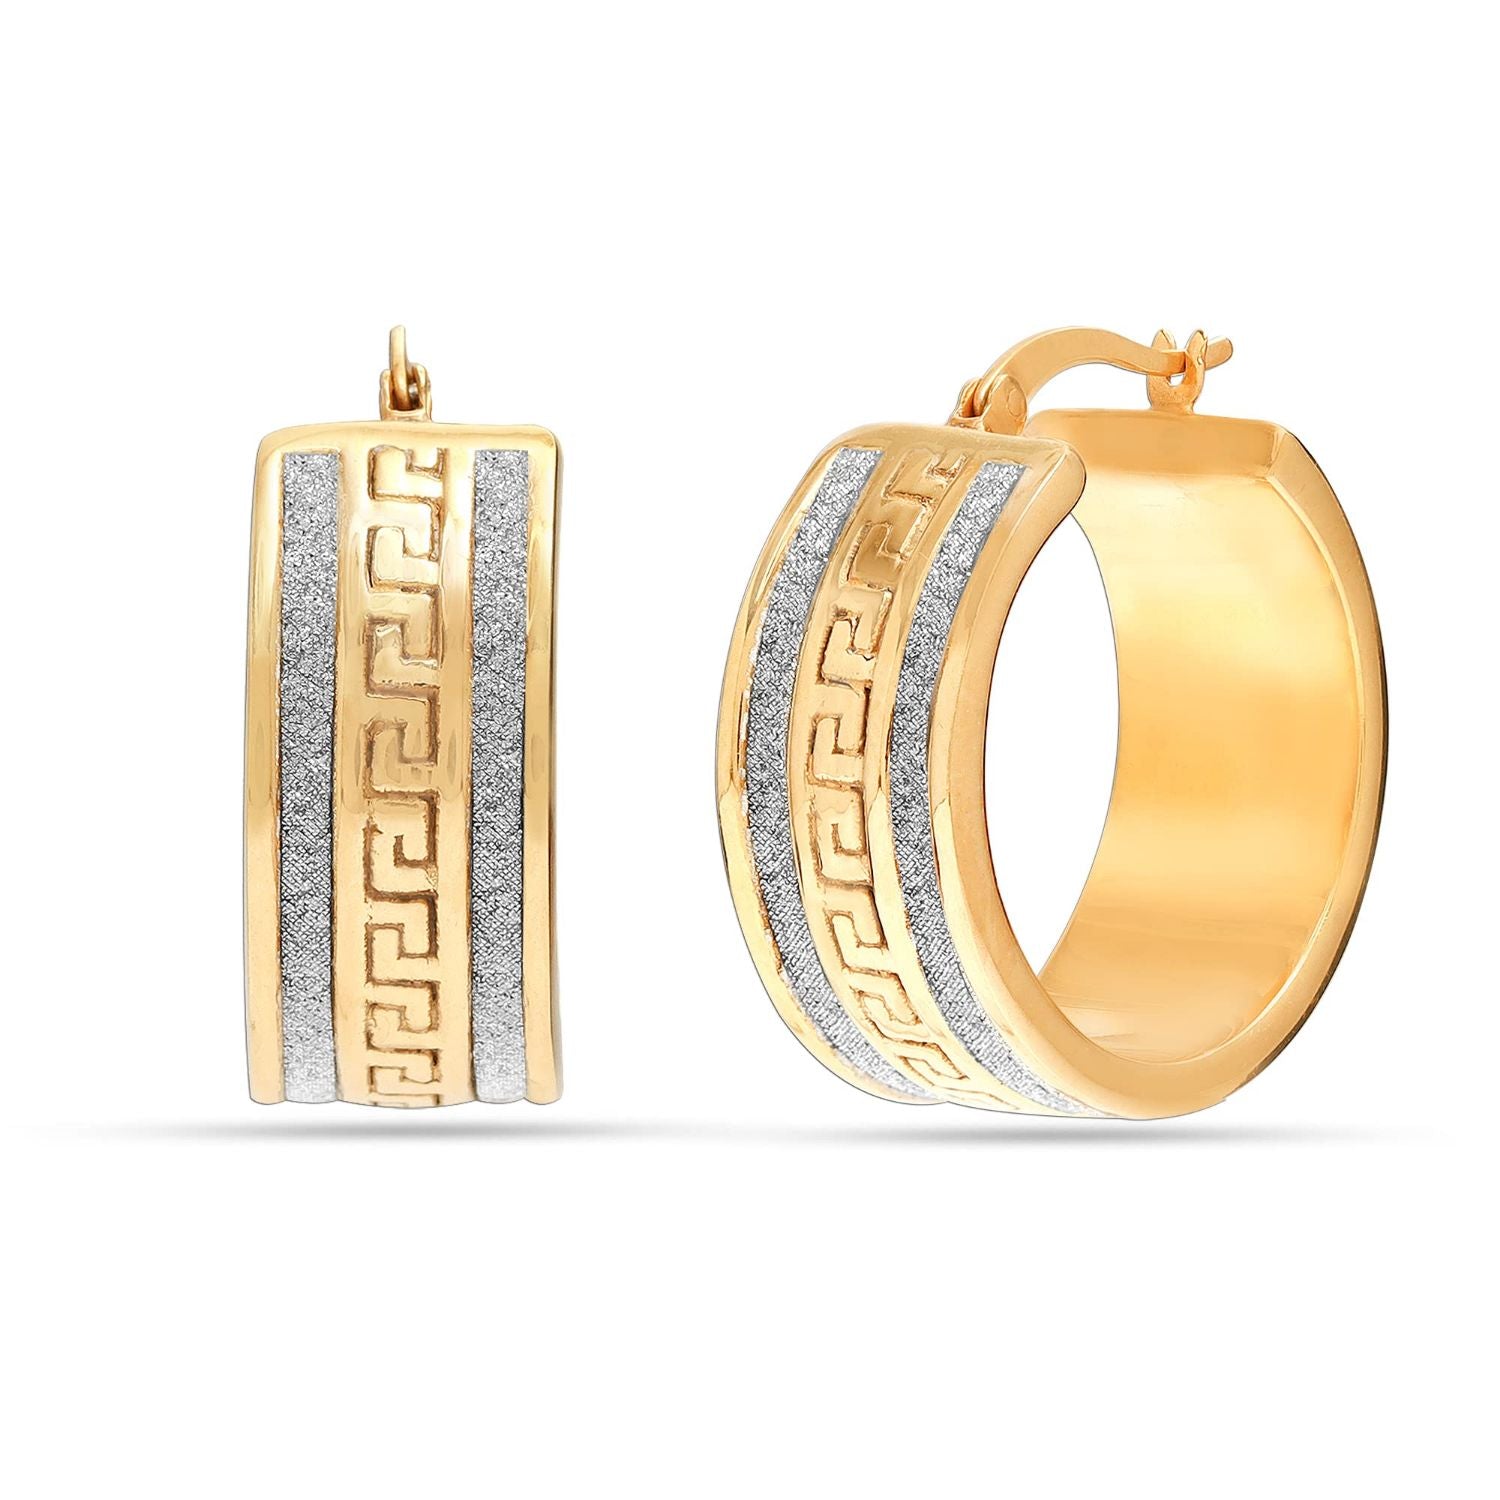 925 Sterling Silver Jewellery Yellow-Gold Glitter Greek-Key Click-Top Round Thick Hoop Earrings for Women